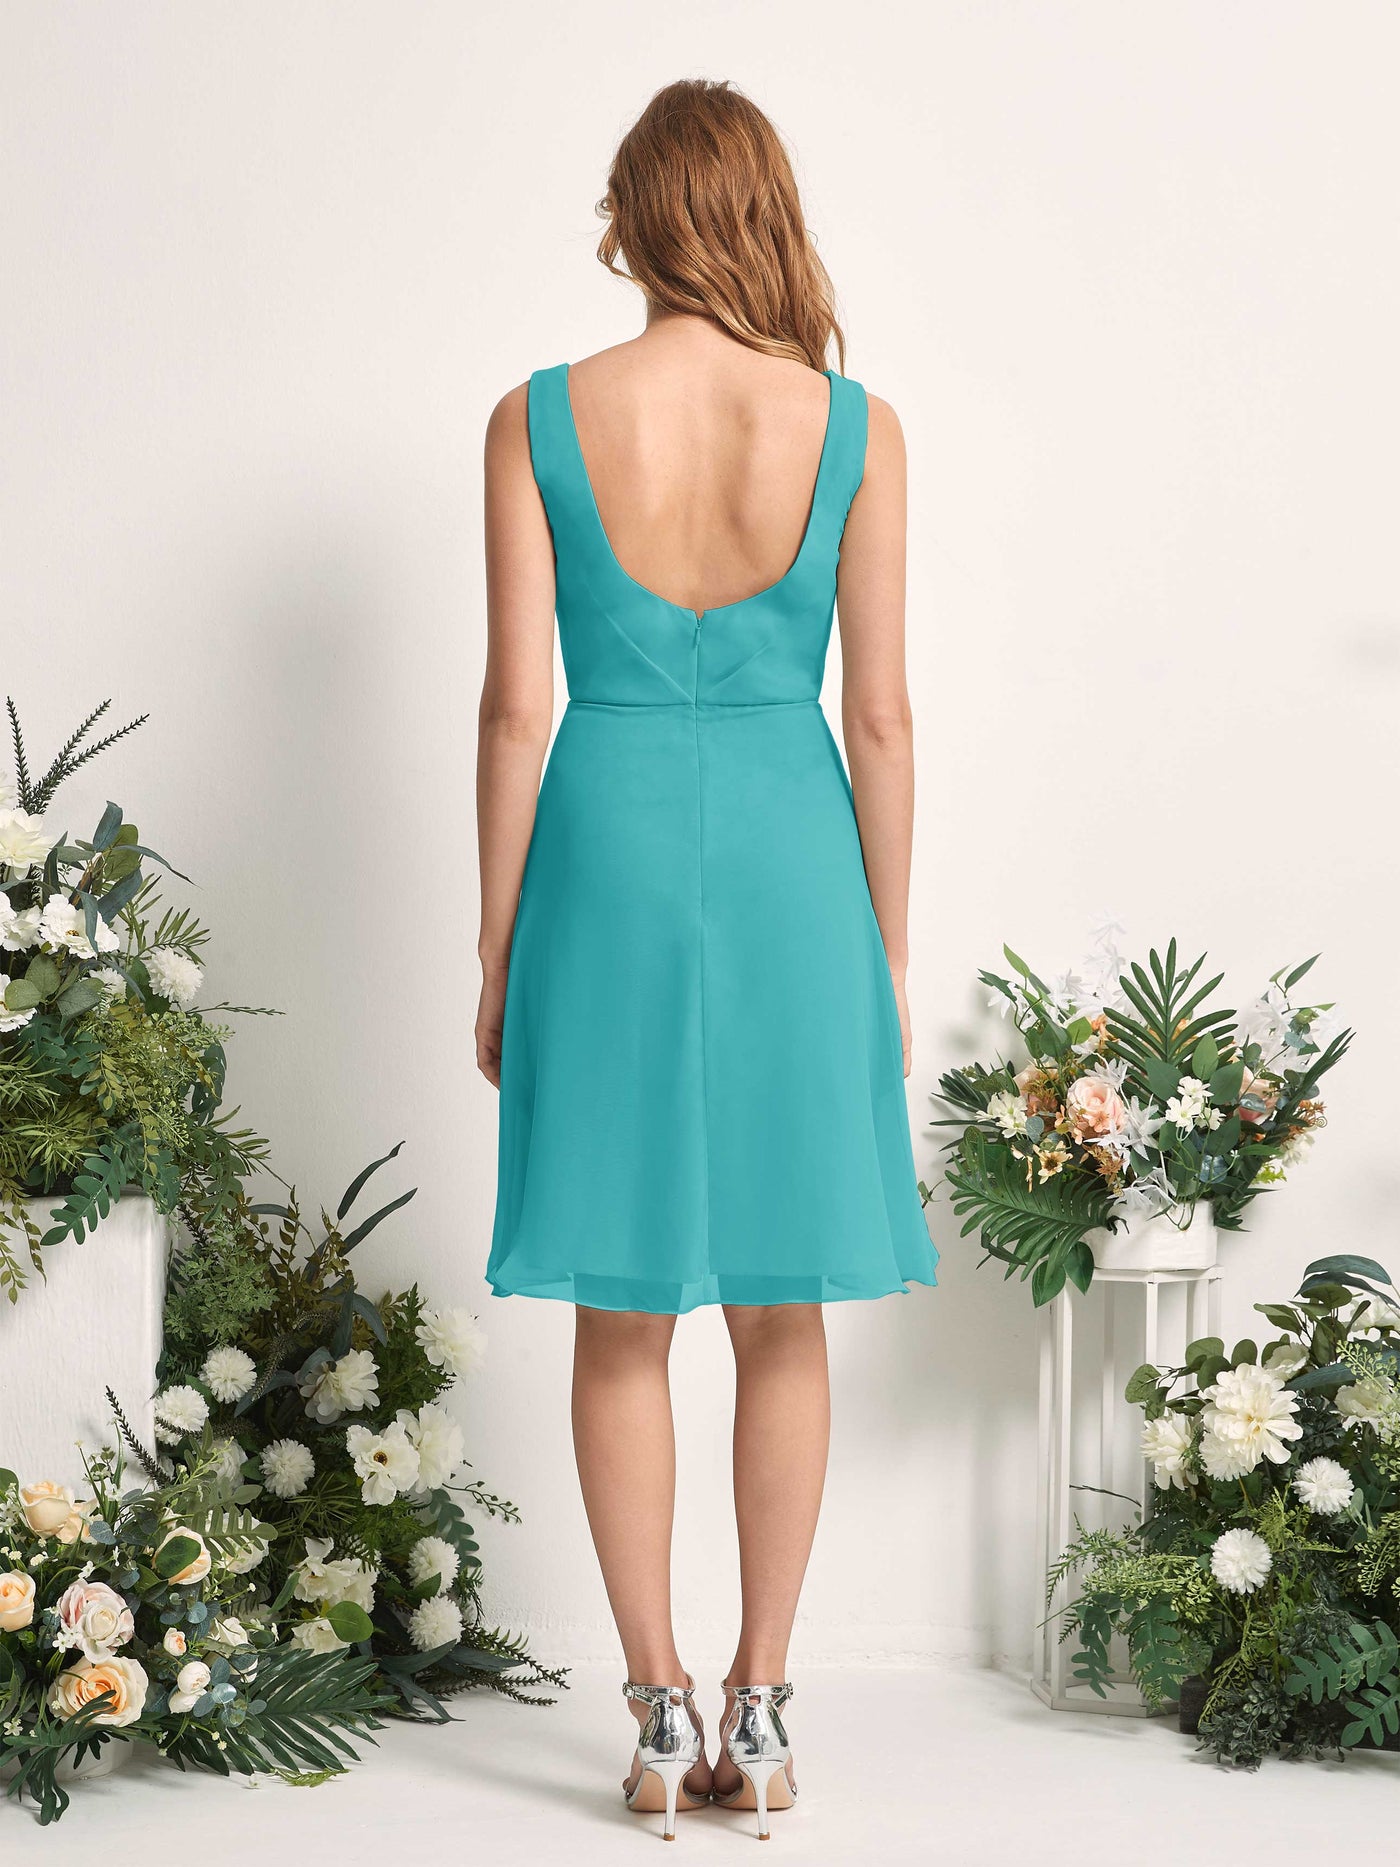 Bridesmaid Dress A-line Chiffon Straps Knee Length Sleeveless Wedding Party Dress - Turquoise (81226623)#color_turquoise